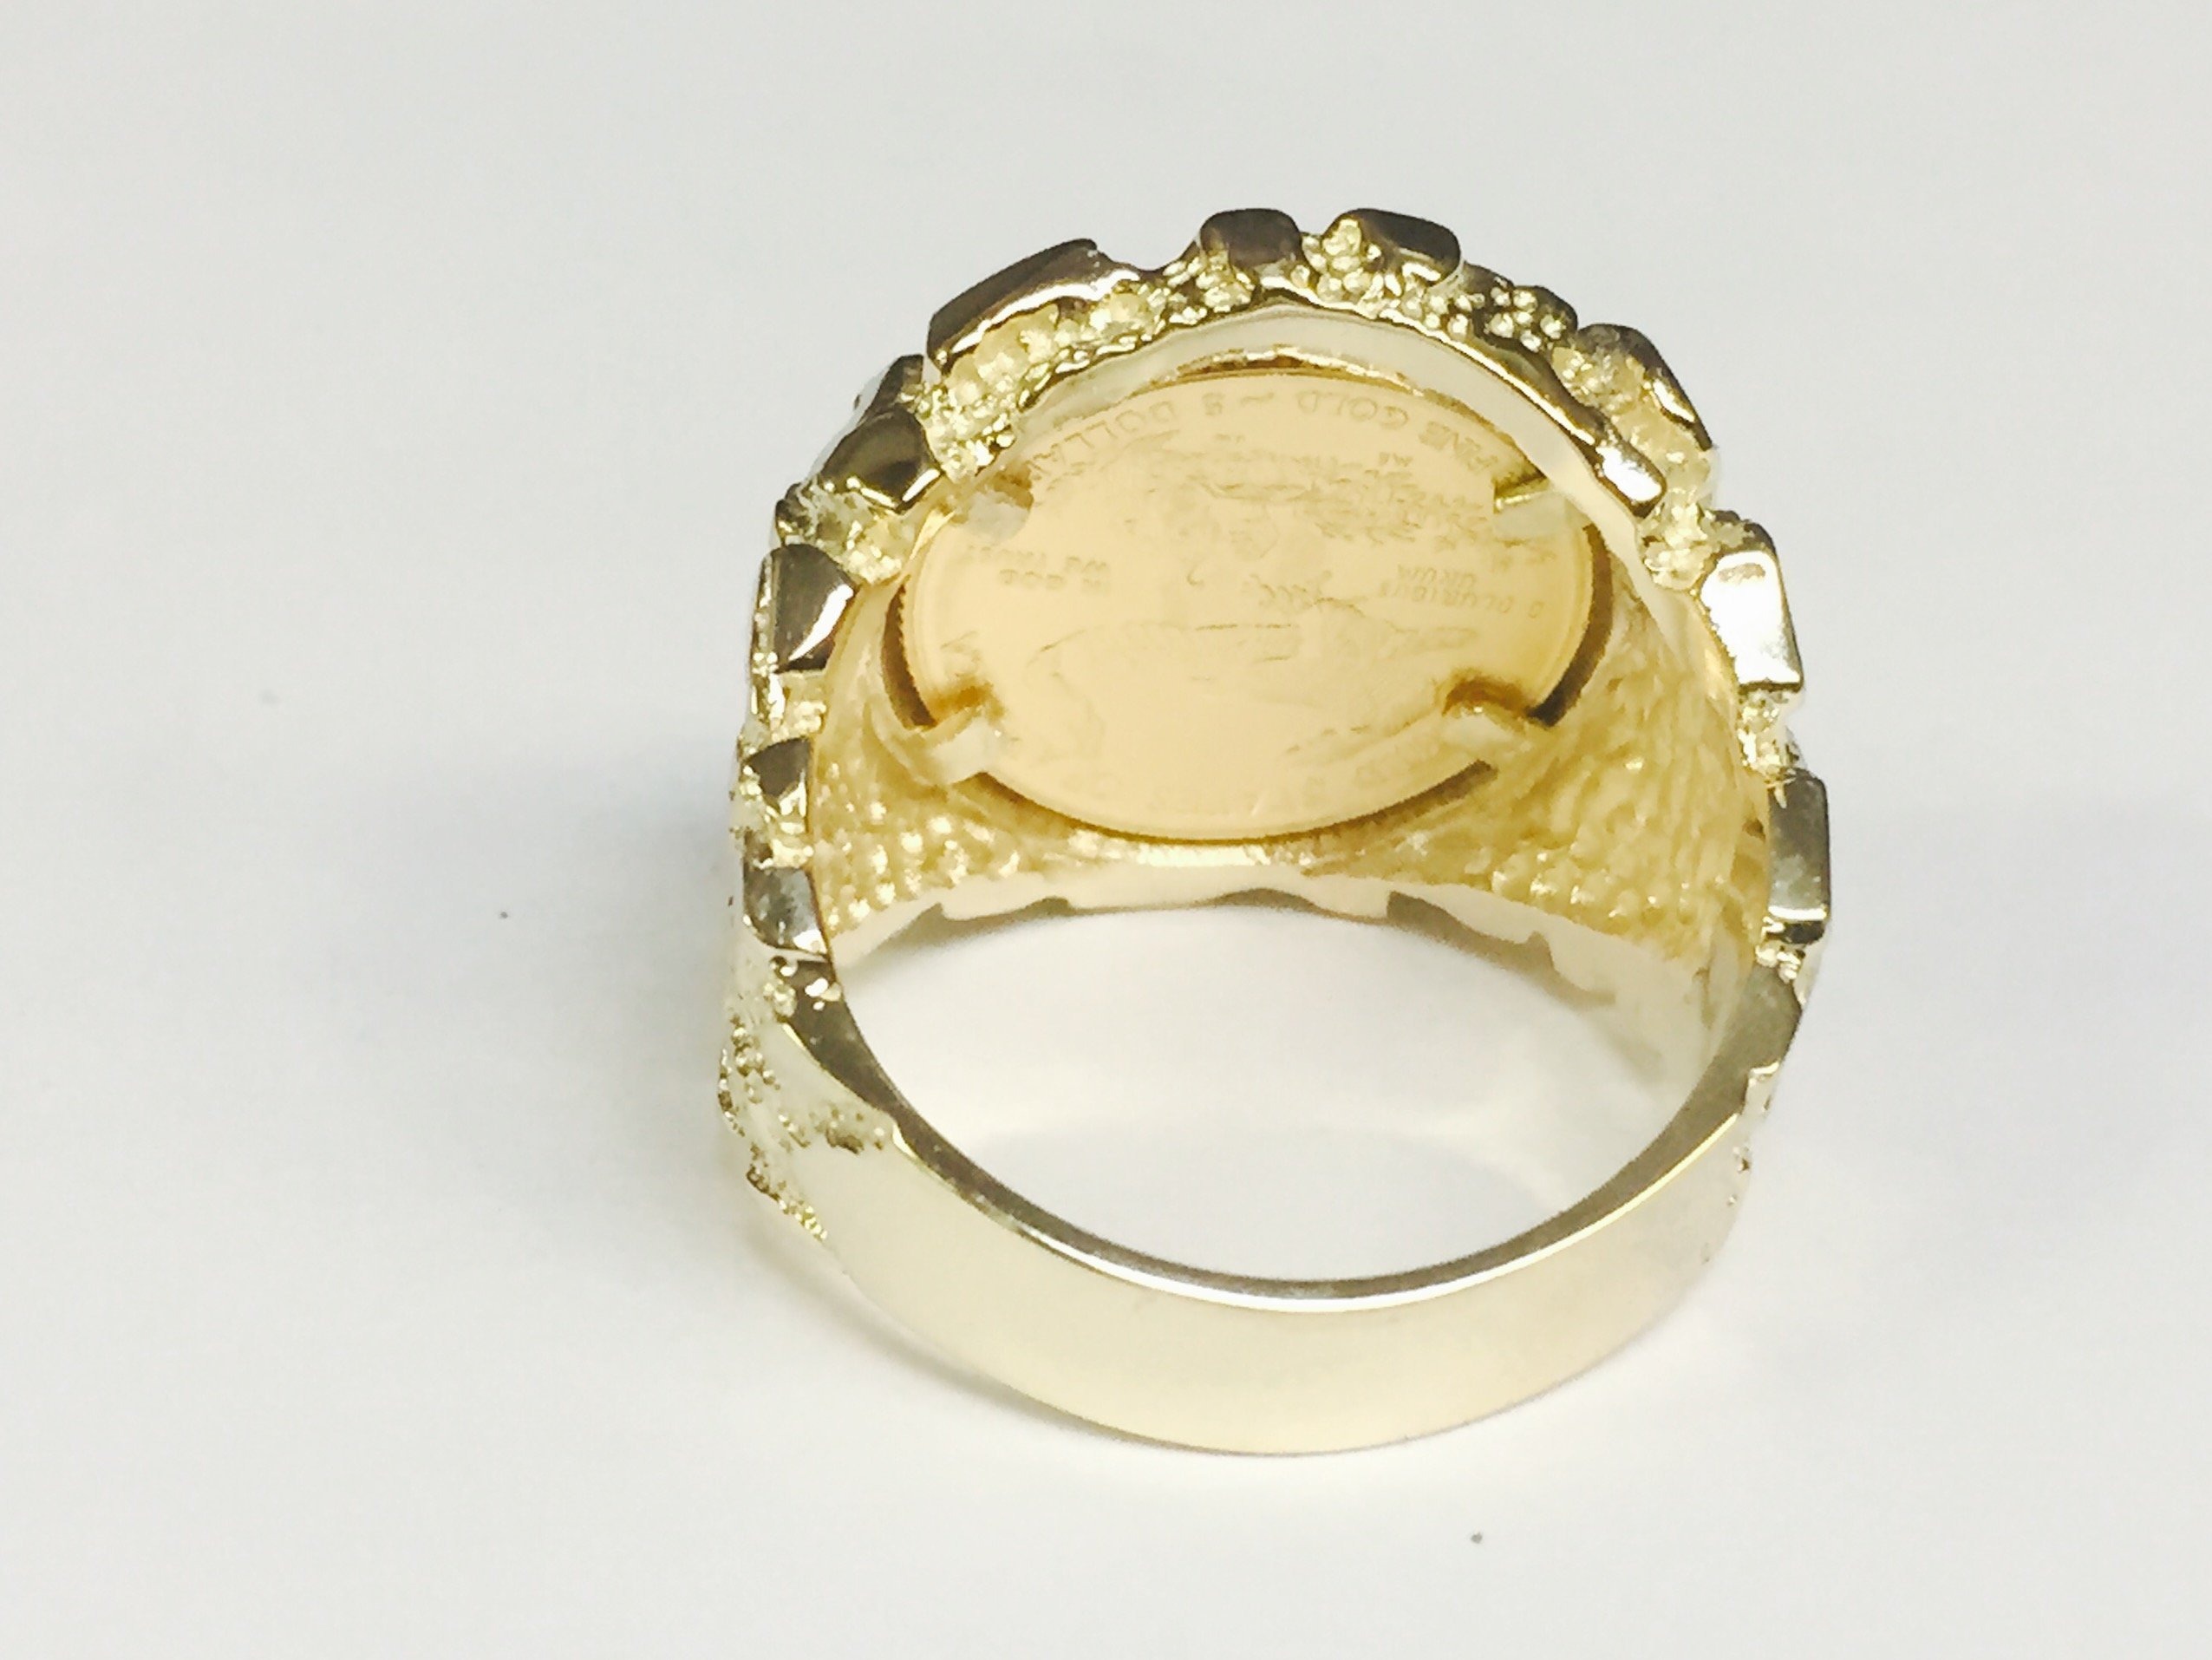 TEX 14K Gold Men's 21 Mm Nugget Coin Ring with A 22 K 1/10 Oz American Eagle Coin - Random Year Coin